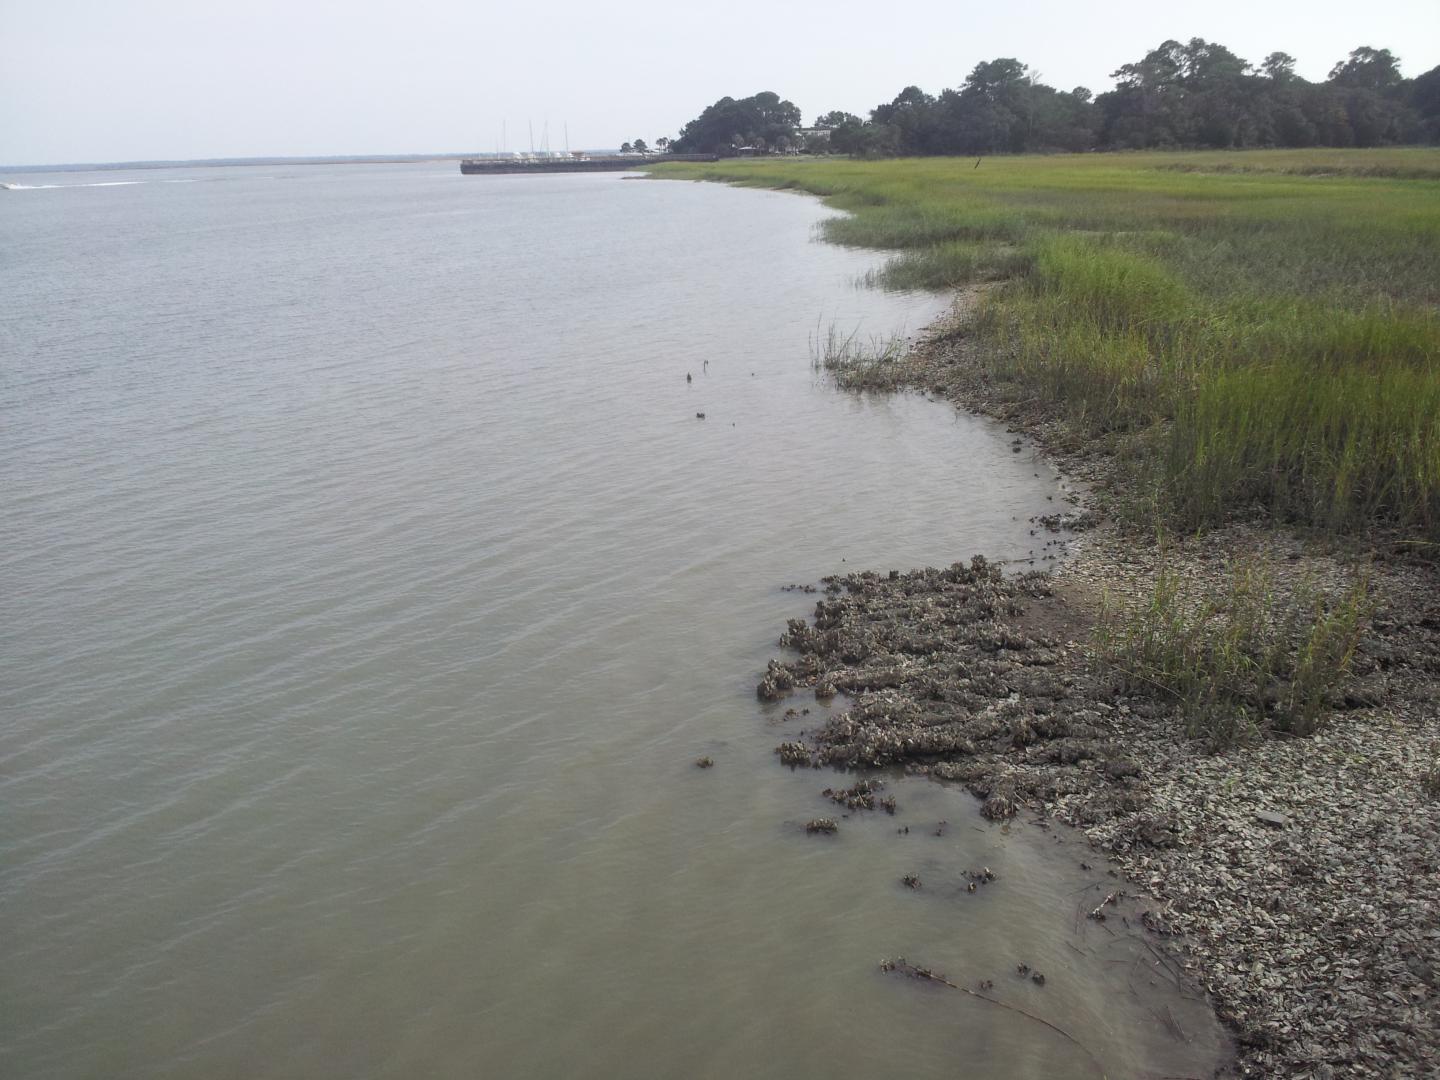 An Oyster Reef Where Crabs Were Sampled